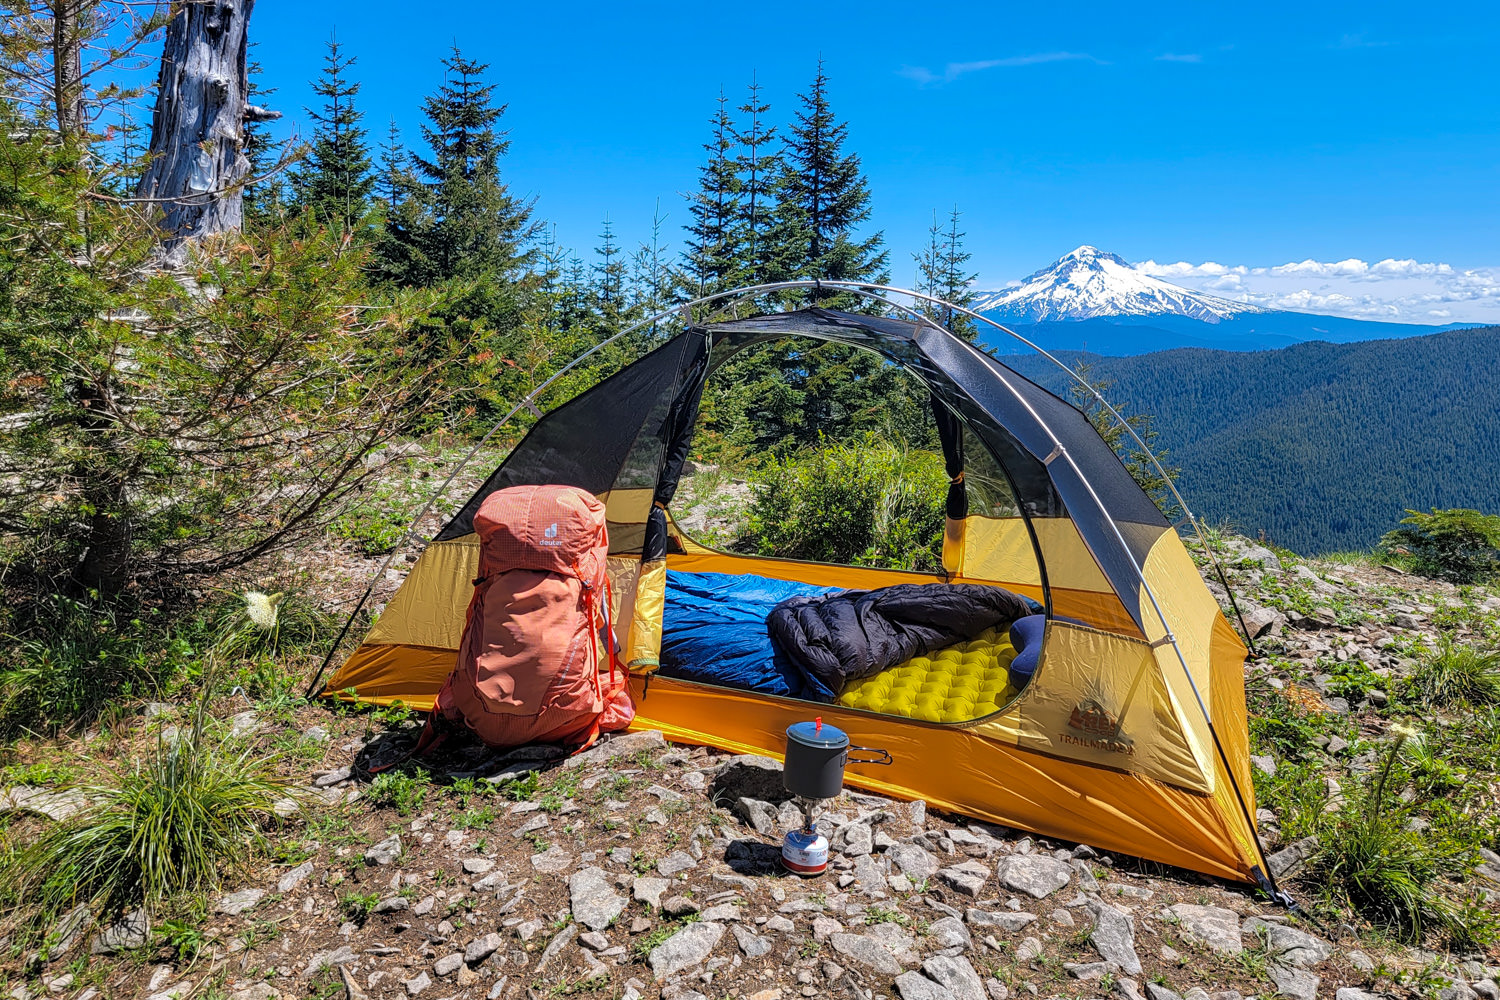 The REI Trailmade 2 backpacking tent set up on a ridge with a view of Mt. Hood in the background